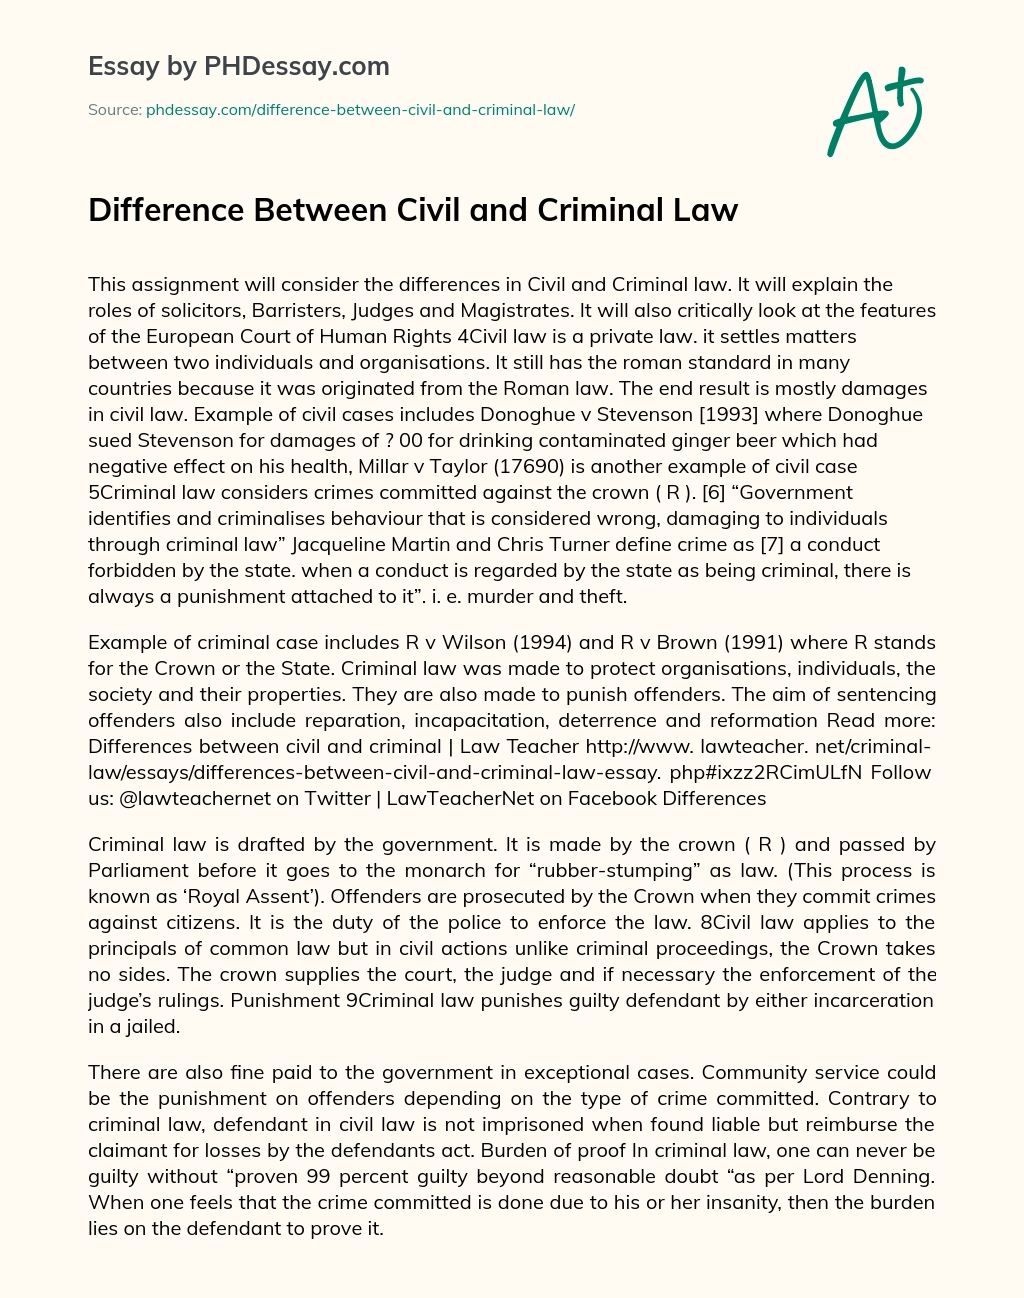 Difference Between Civil and Criminal Law essay